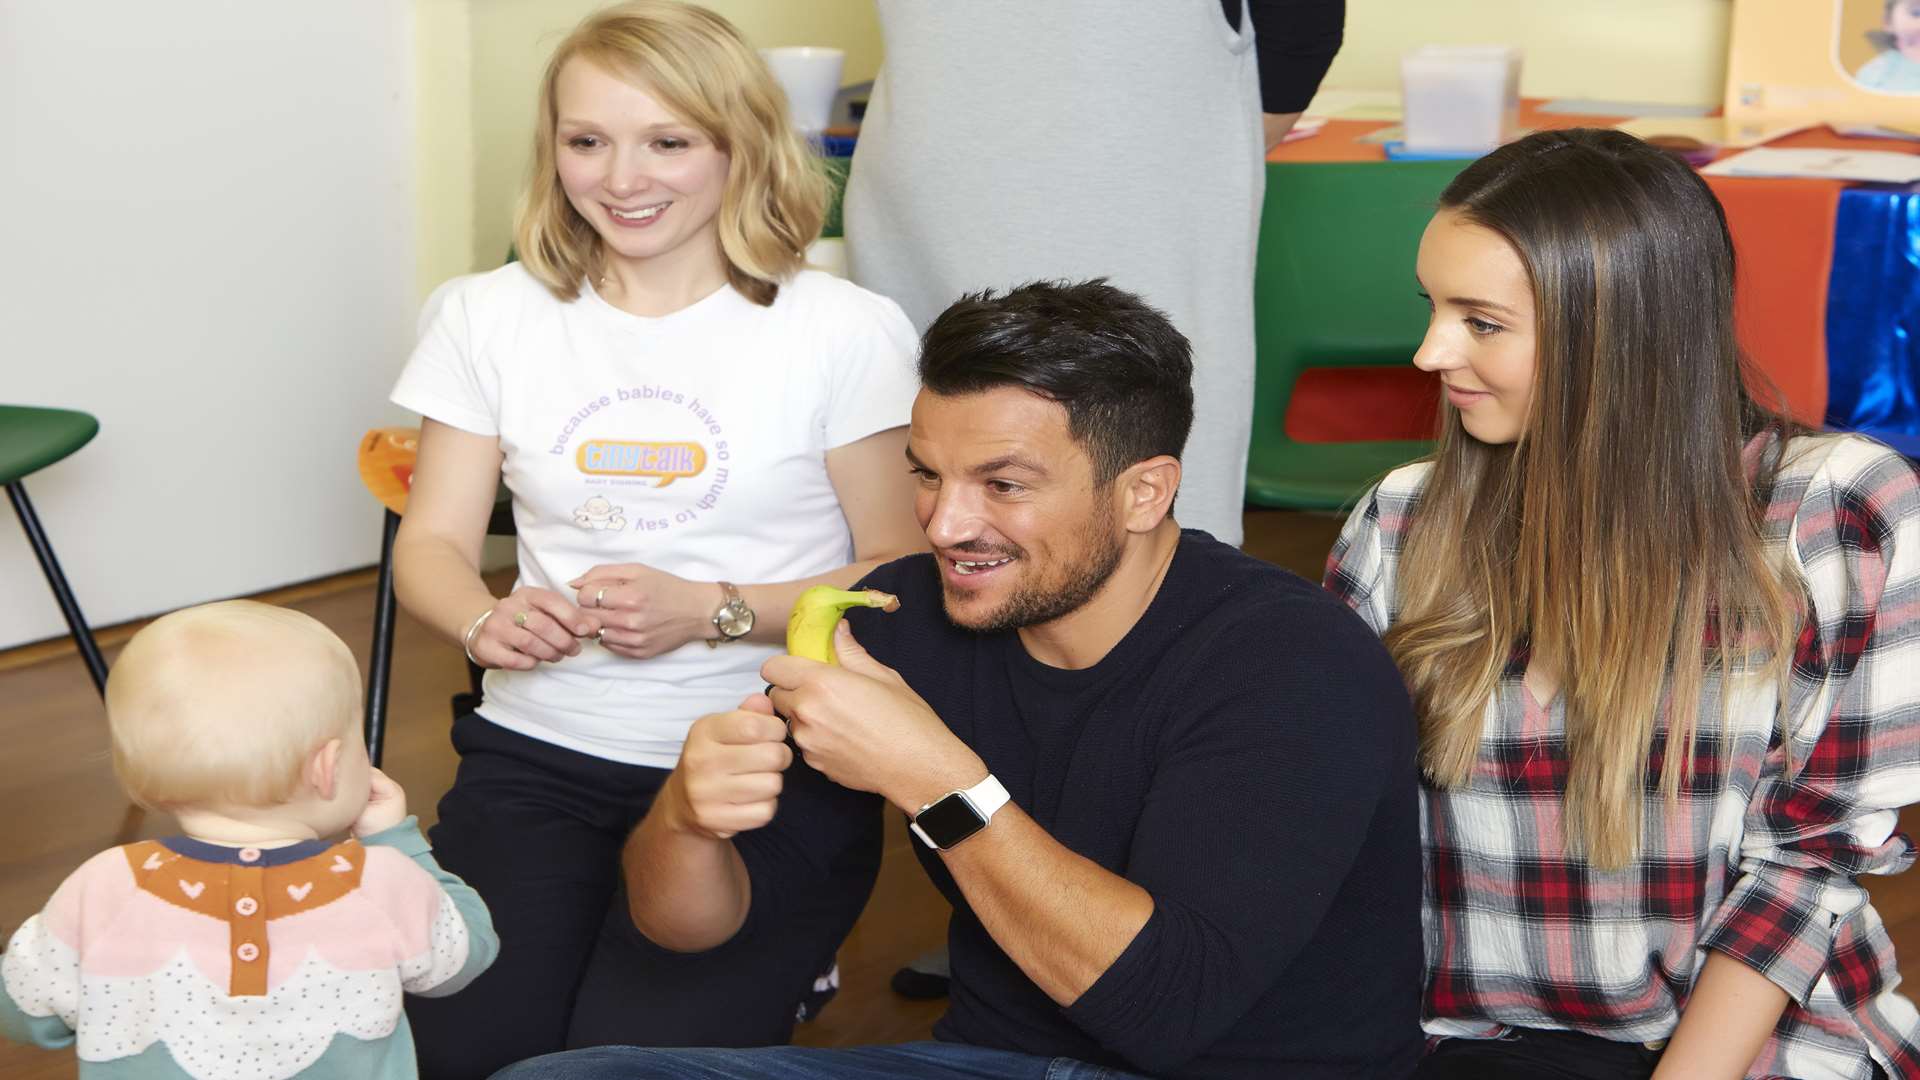 Peter Andre tries out the new signing skills he learnt after meeting Rebecca Oakley. Picture: npower